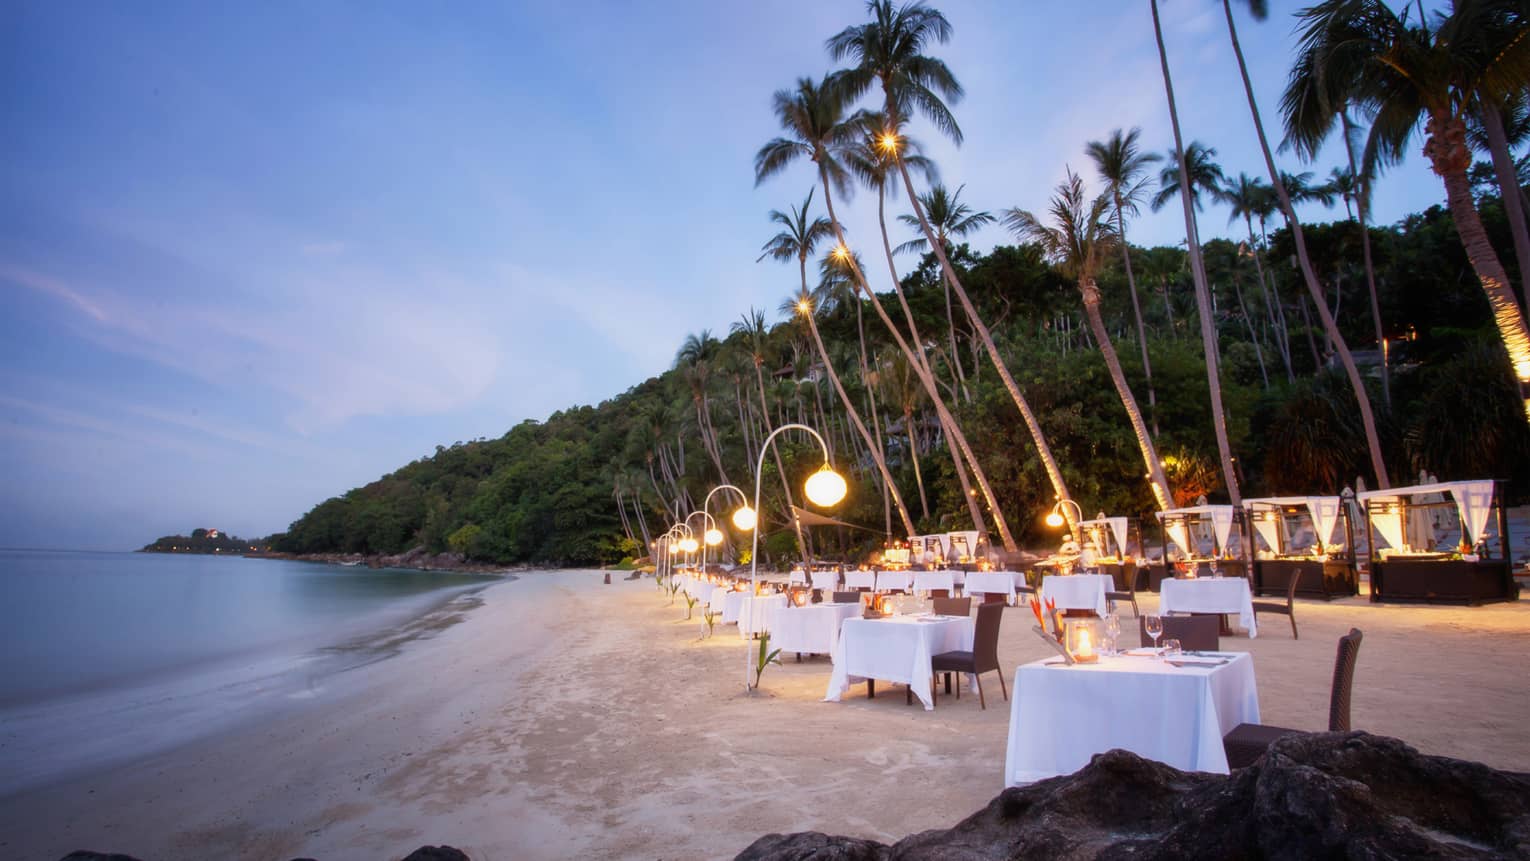 Dining tables set up along white sand beach under palm trees at dusk